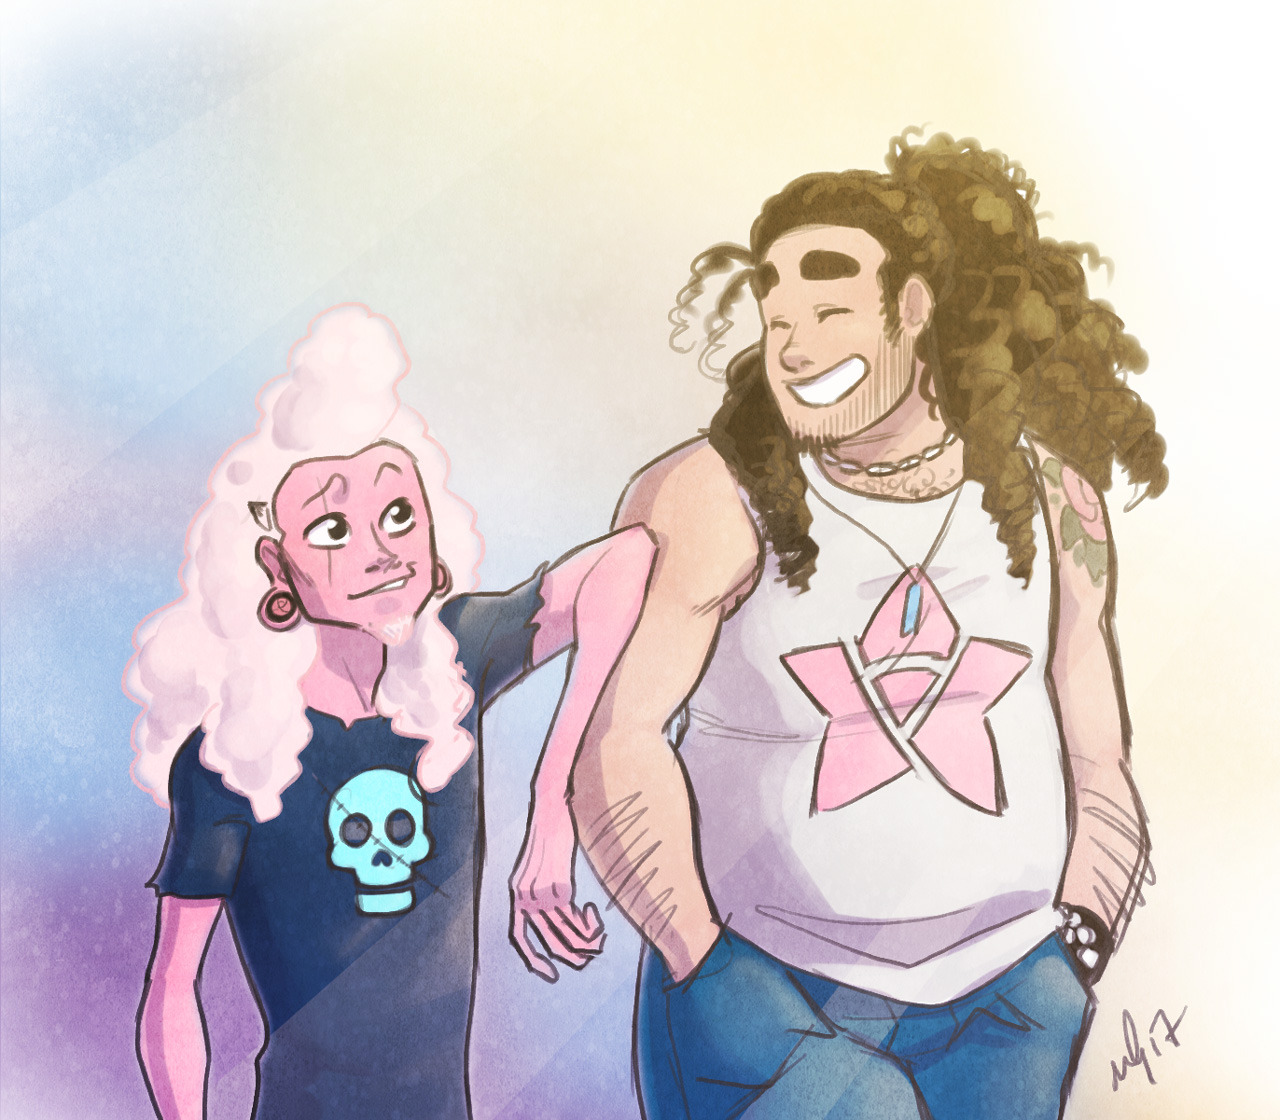 More oldposting, this time featuring @maariamph‘s Big Hair Hippie Steven and my Weird Al PinkoLars. I figured Lars would need more hair pretty soon, if Rose Quartz is anything to go by.